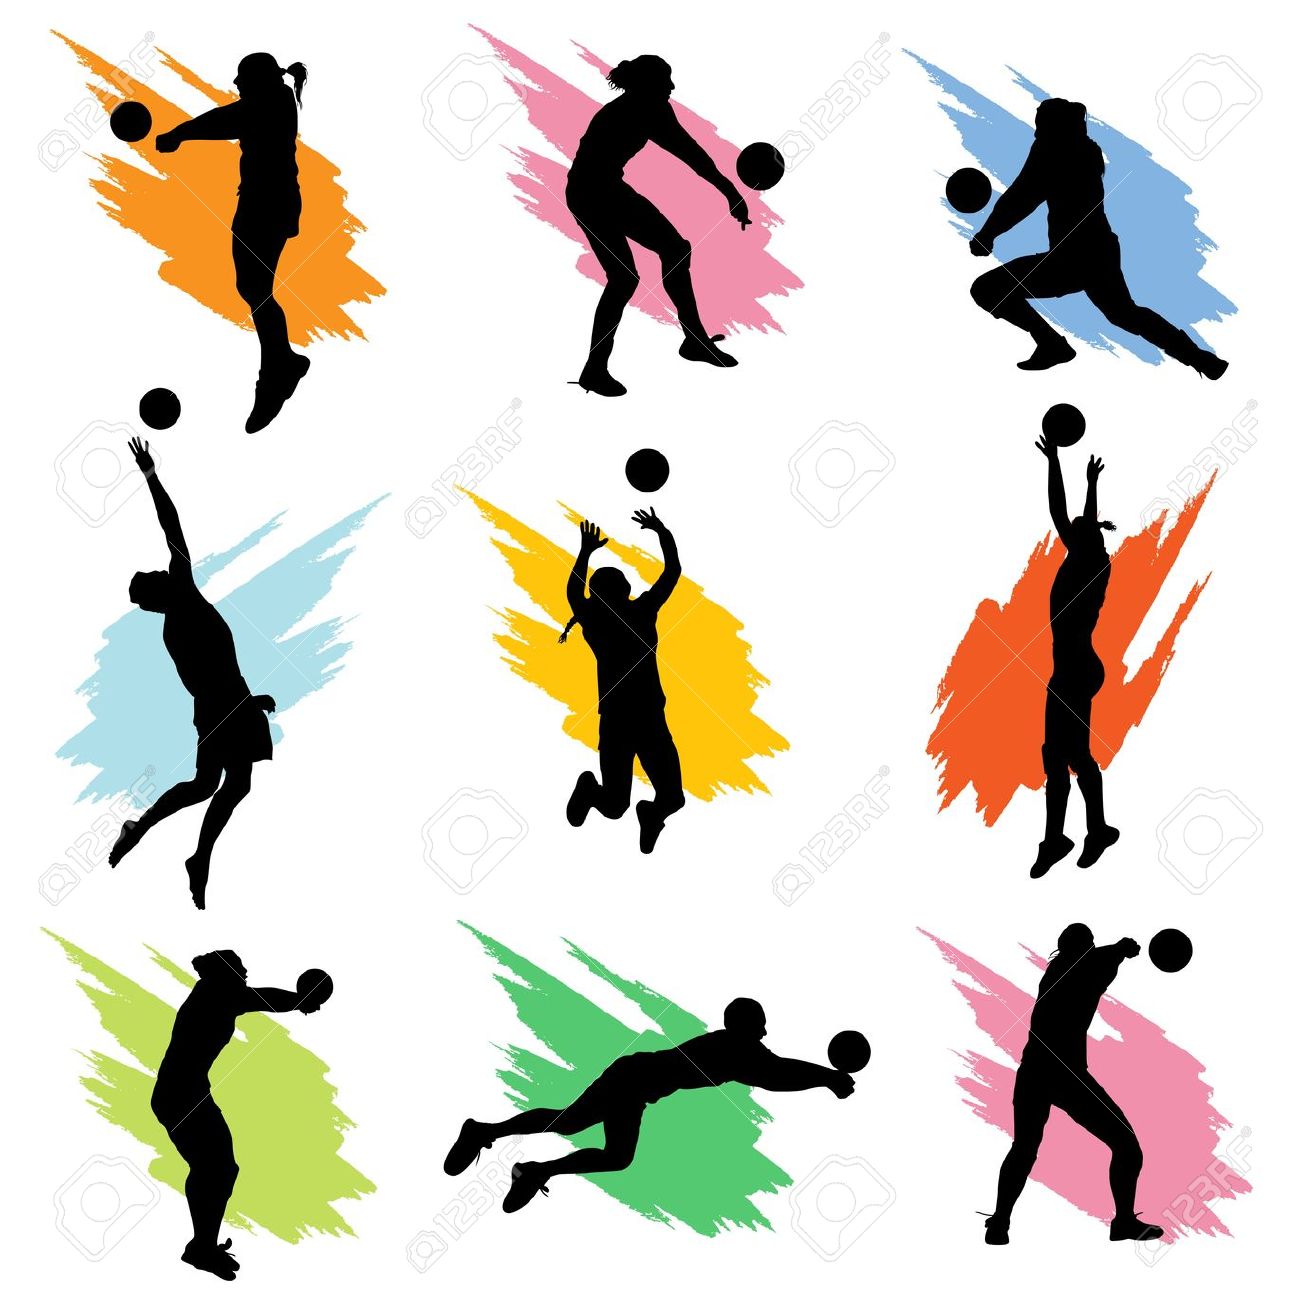 volleyball setting clipart - photo #42